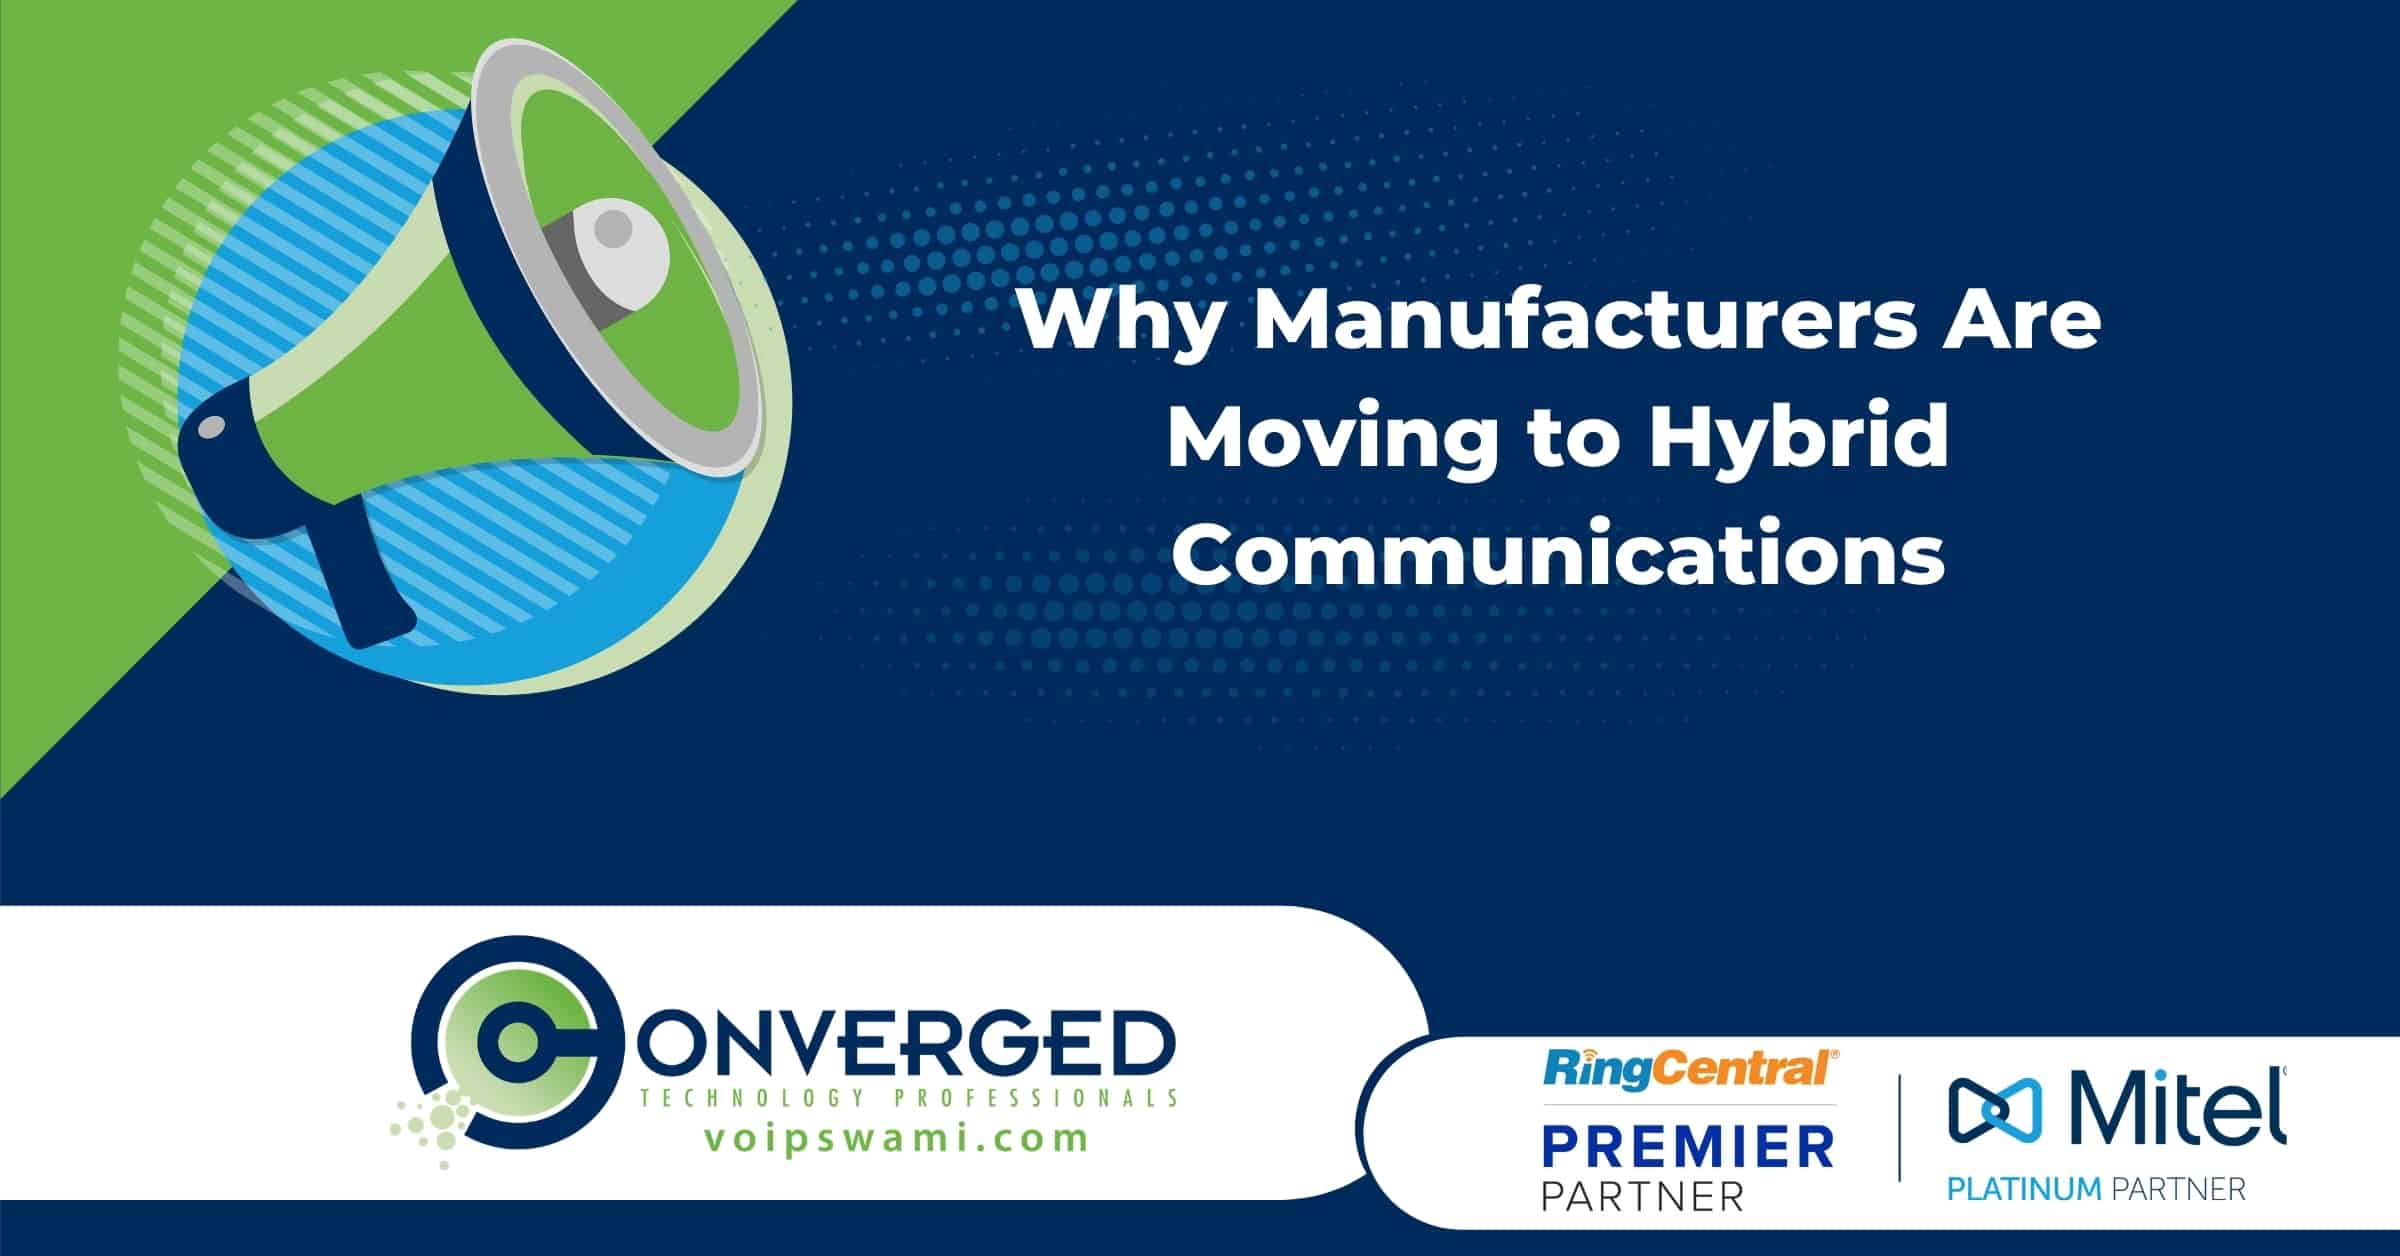 Why Manufacturers Are Moving to Hybrid Communications